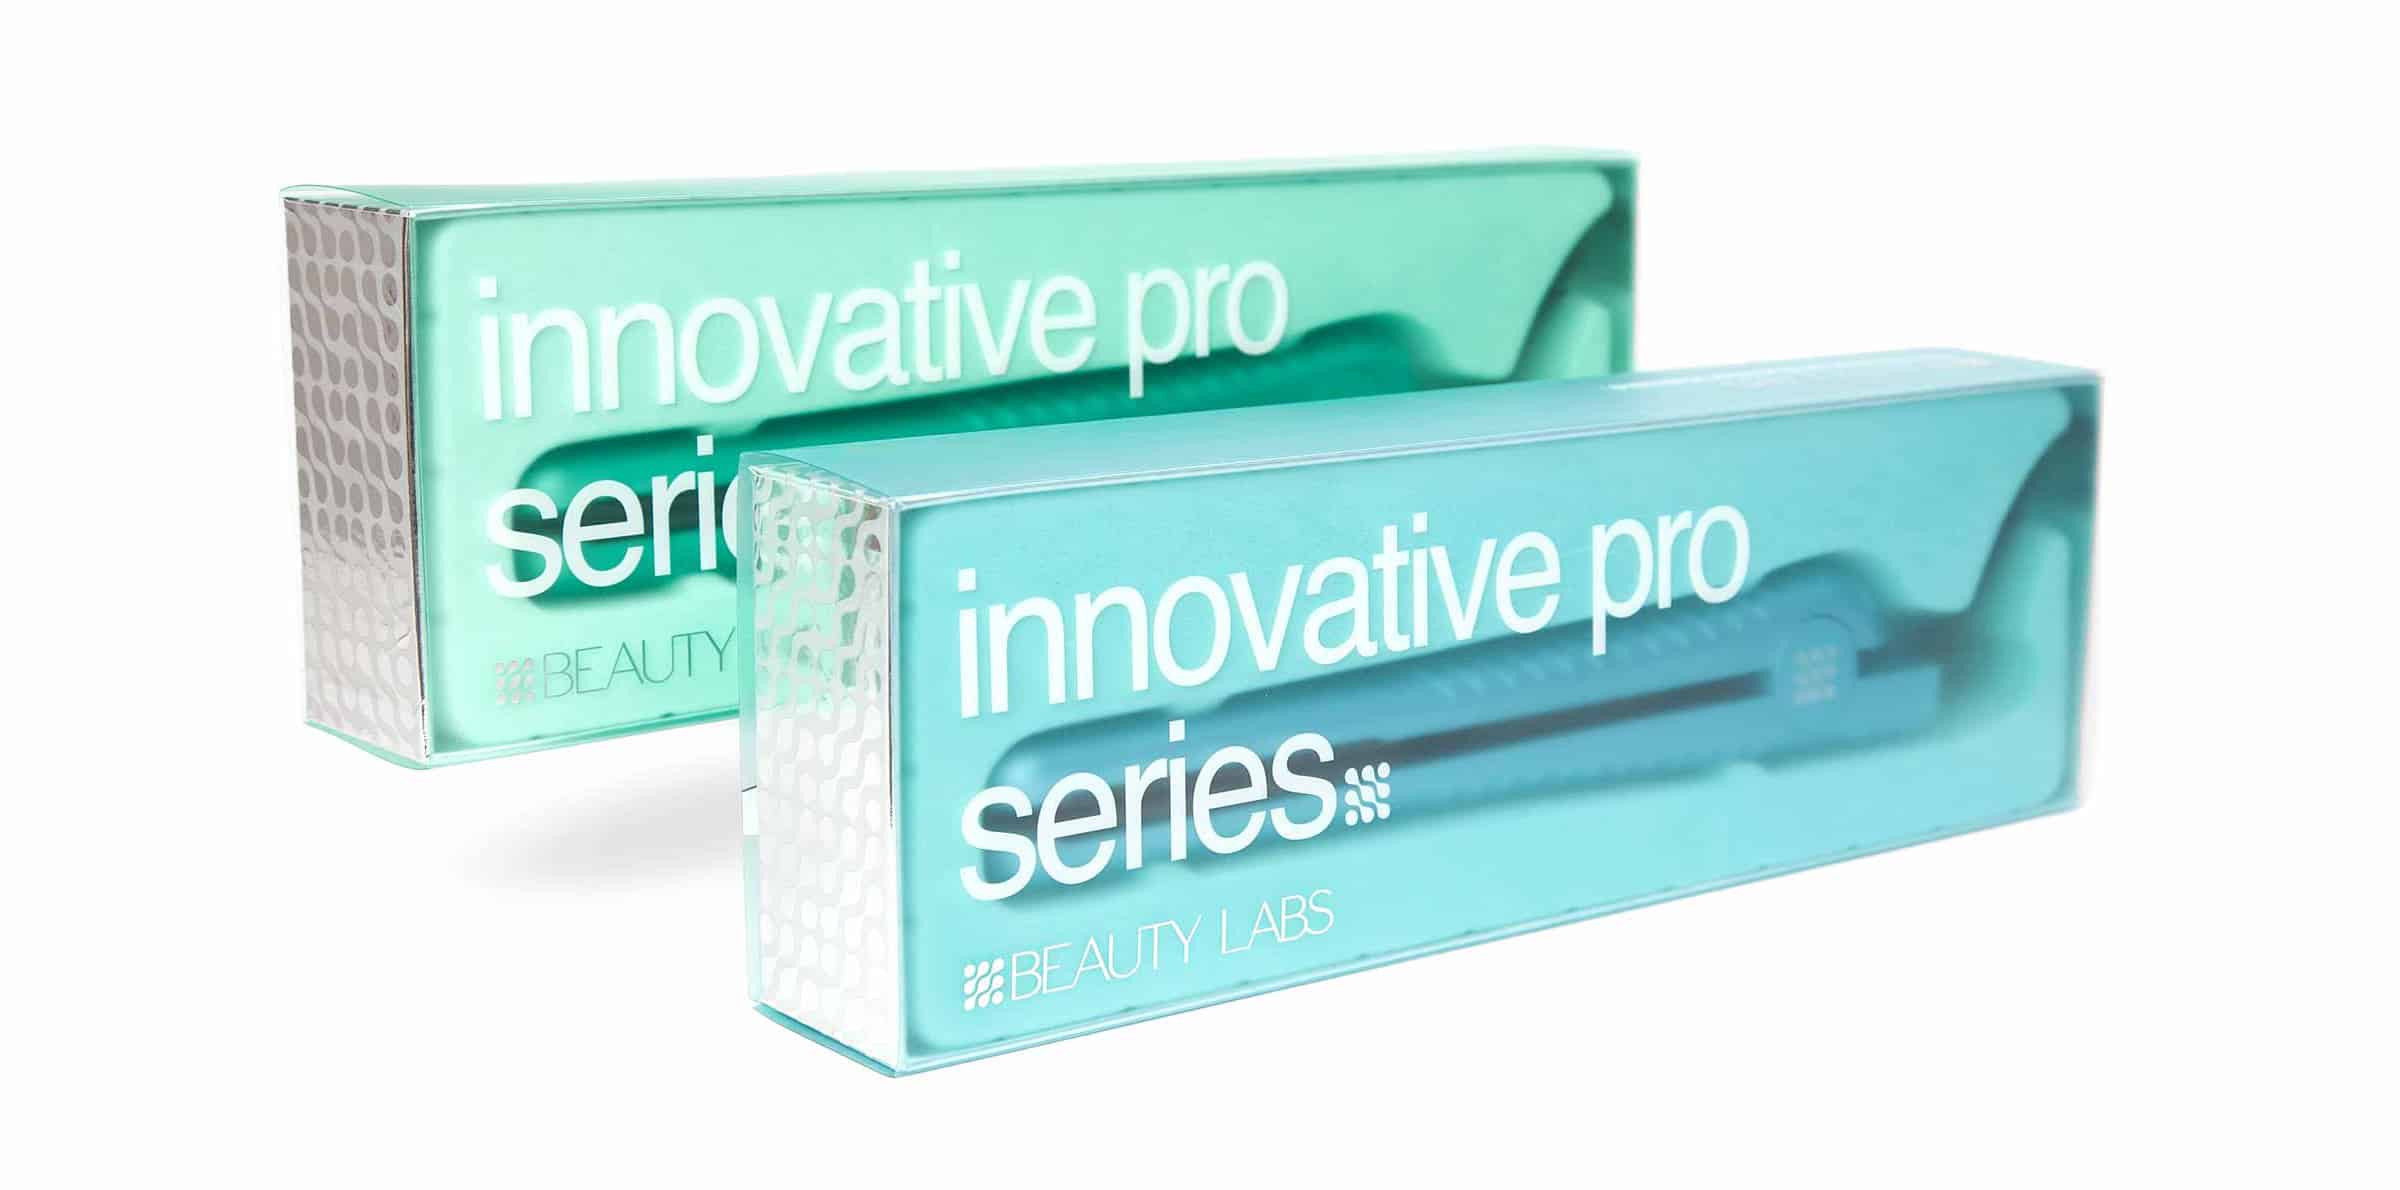 Beauty Labs minimalist packaging design including two flat irons in aqua blue and green against white backdrop.